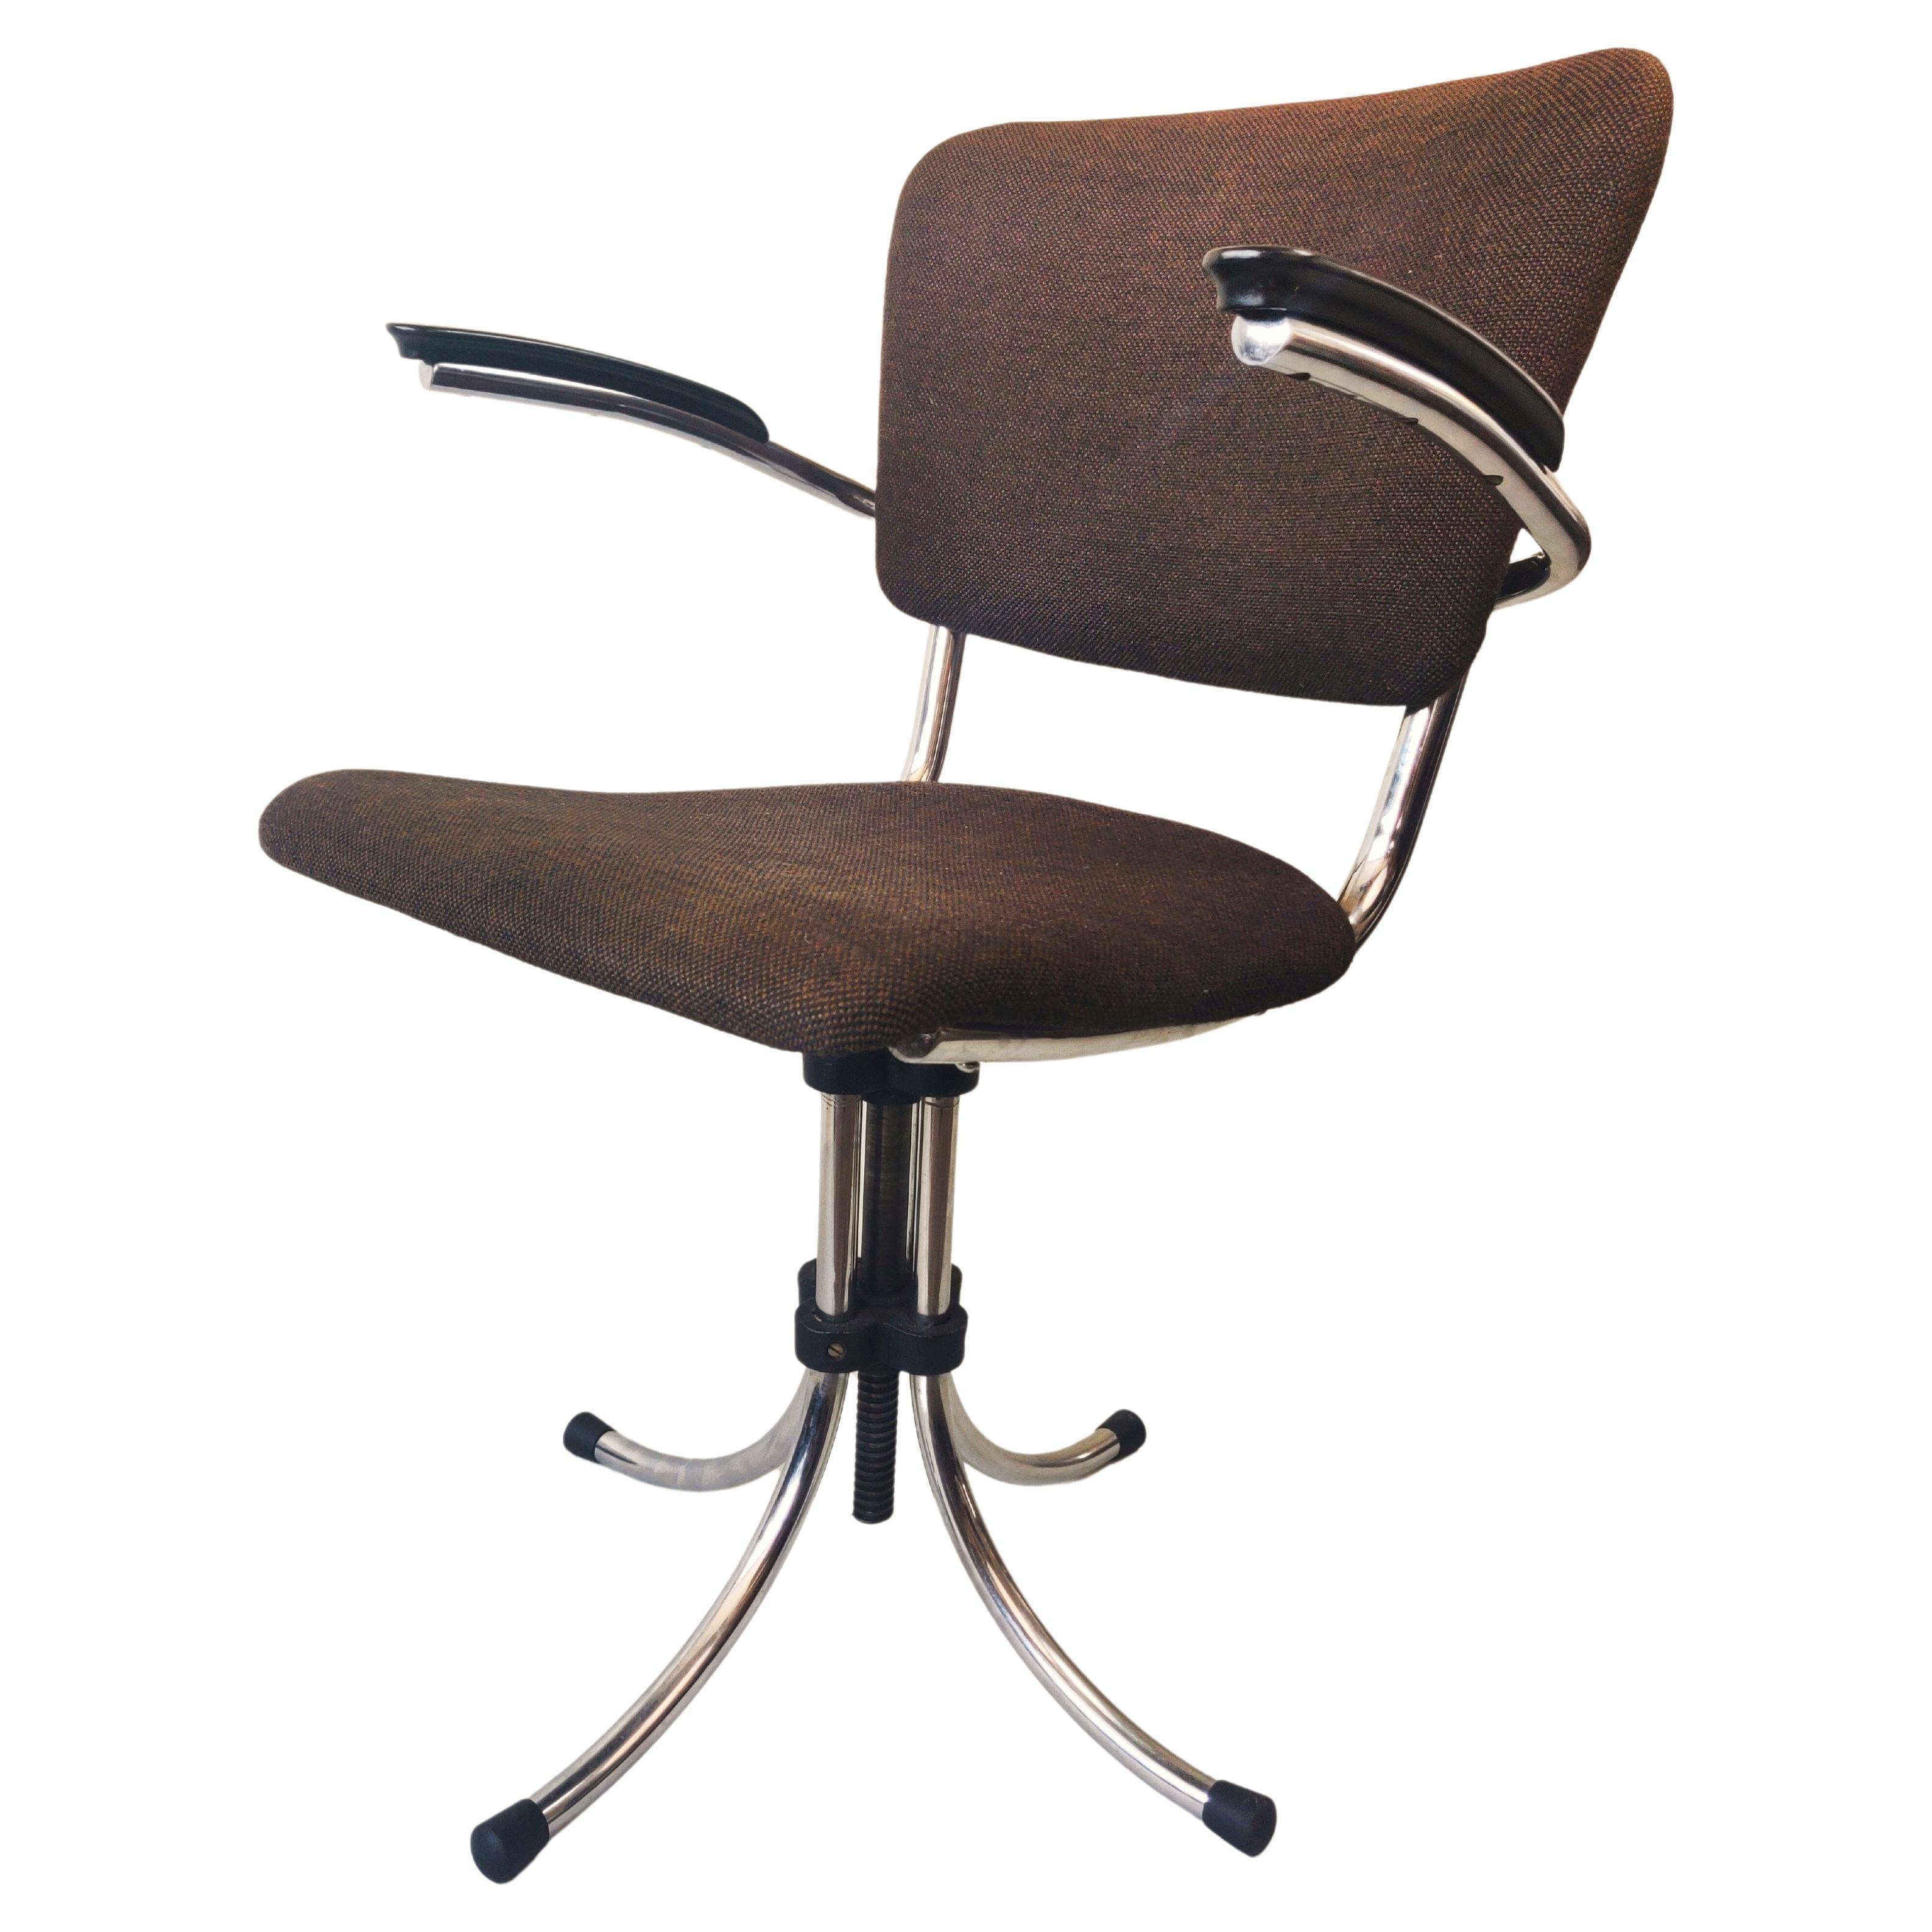 Chair by Paul Schuitema for Fana, Rotterdam, 1960s For Sale